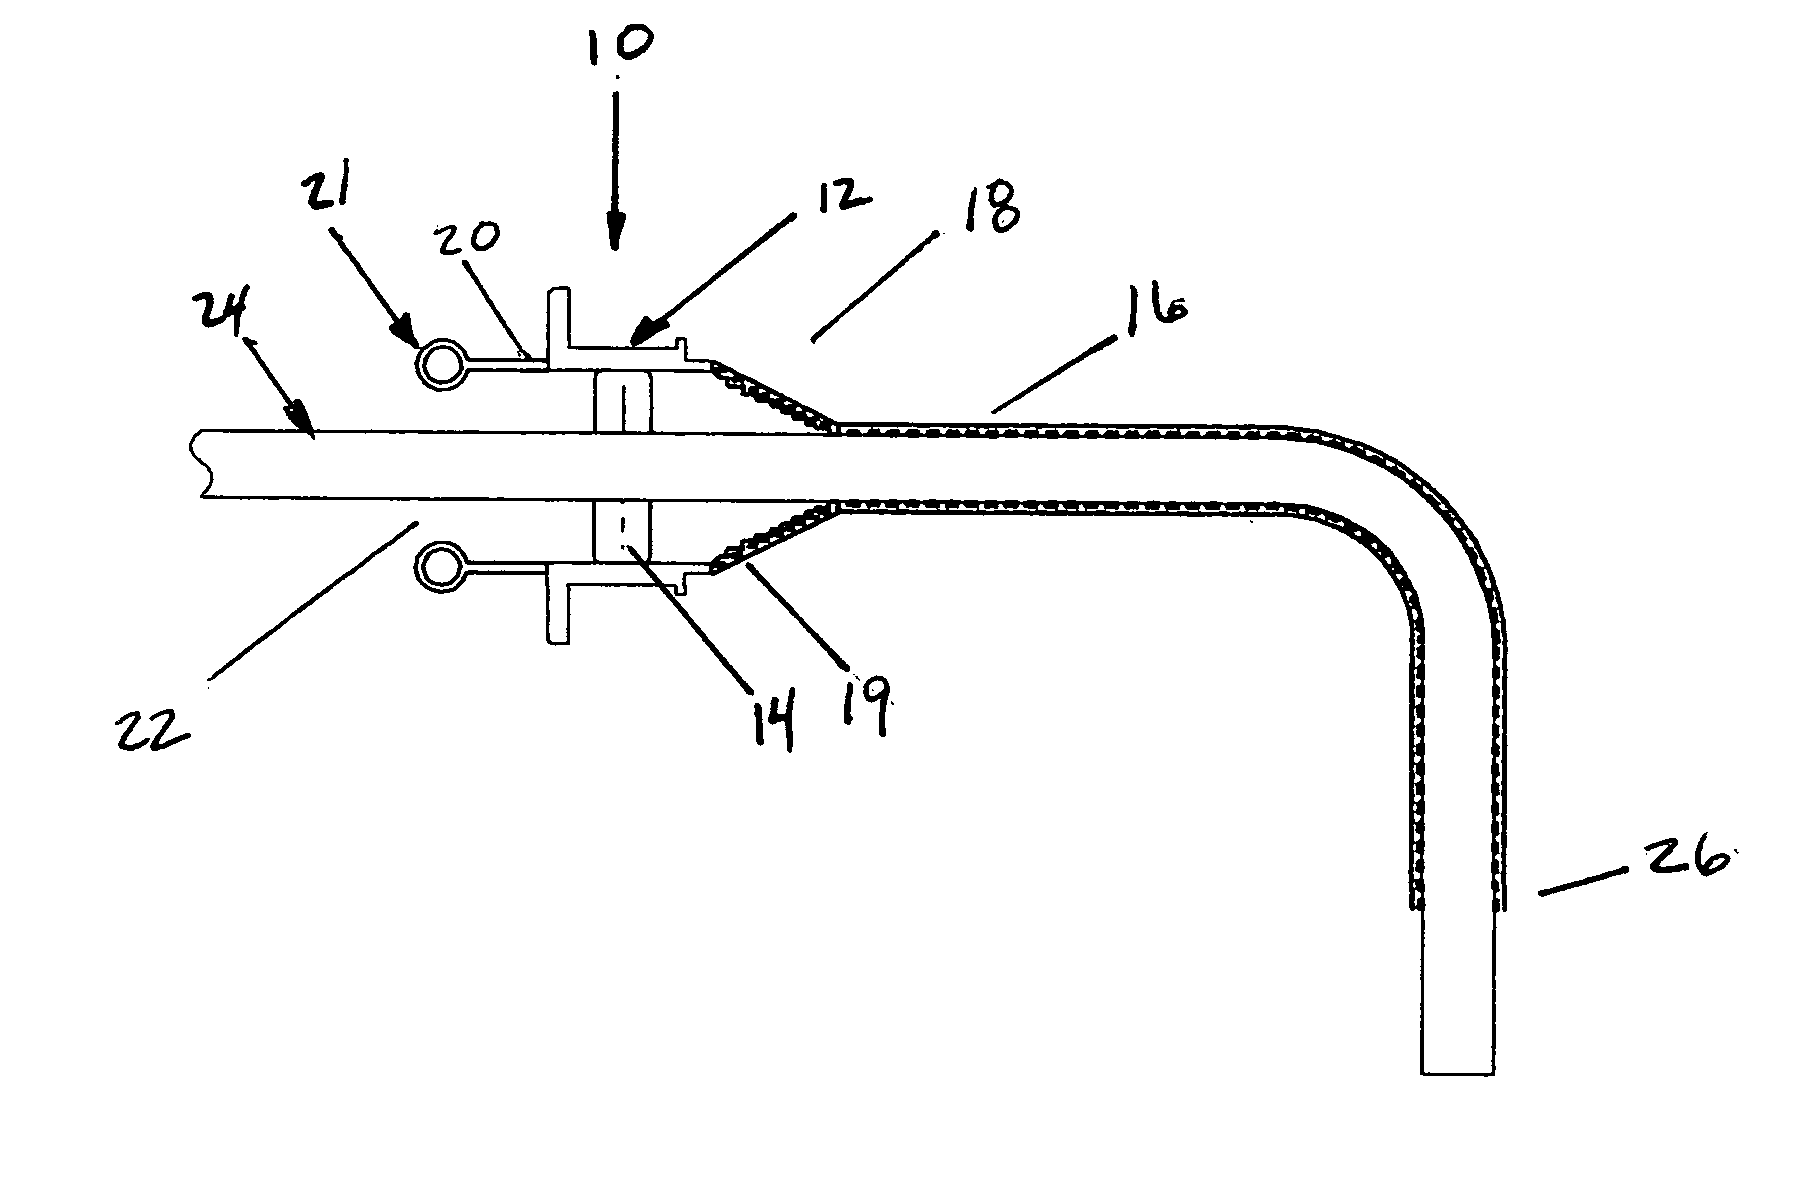 Expandable esophageal access device